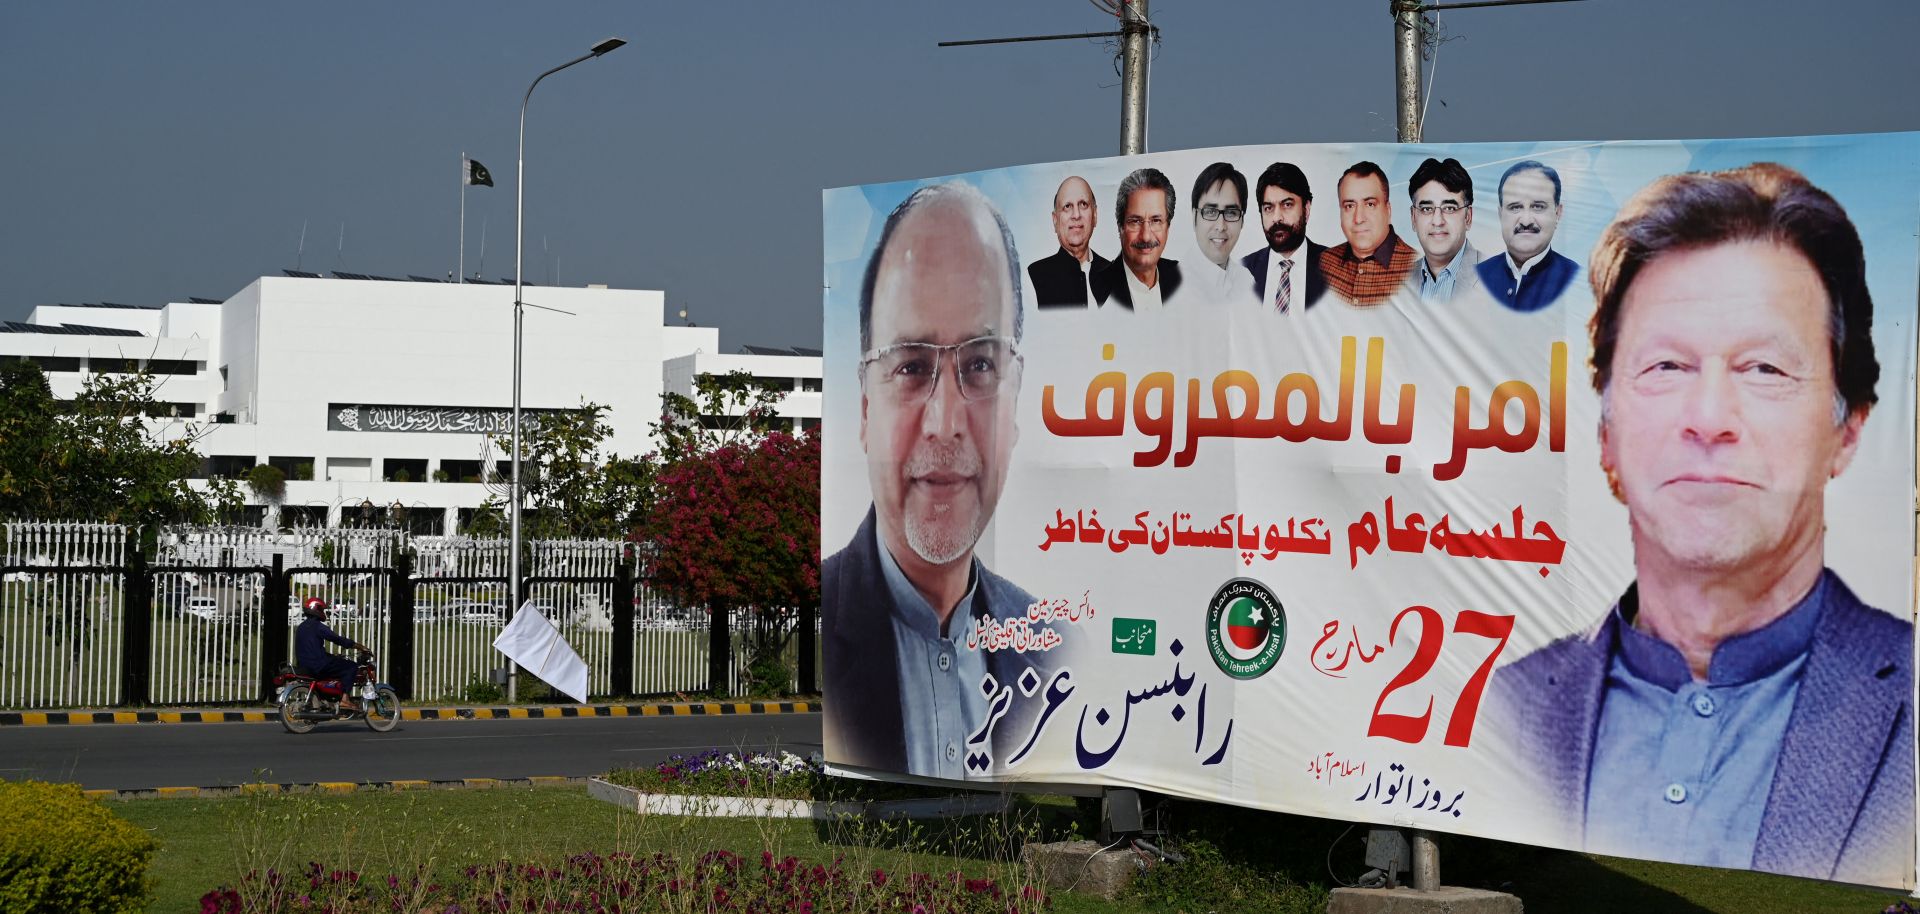 A banner featuring an image of Pakistani Prime Minister Imran Khan (right) is seen outside the parliament building in Islamabad on March 31, 2022. 